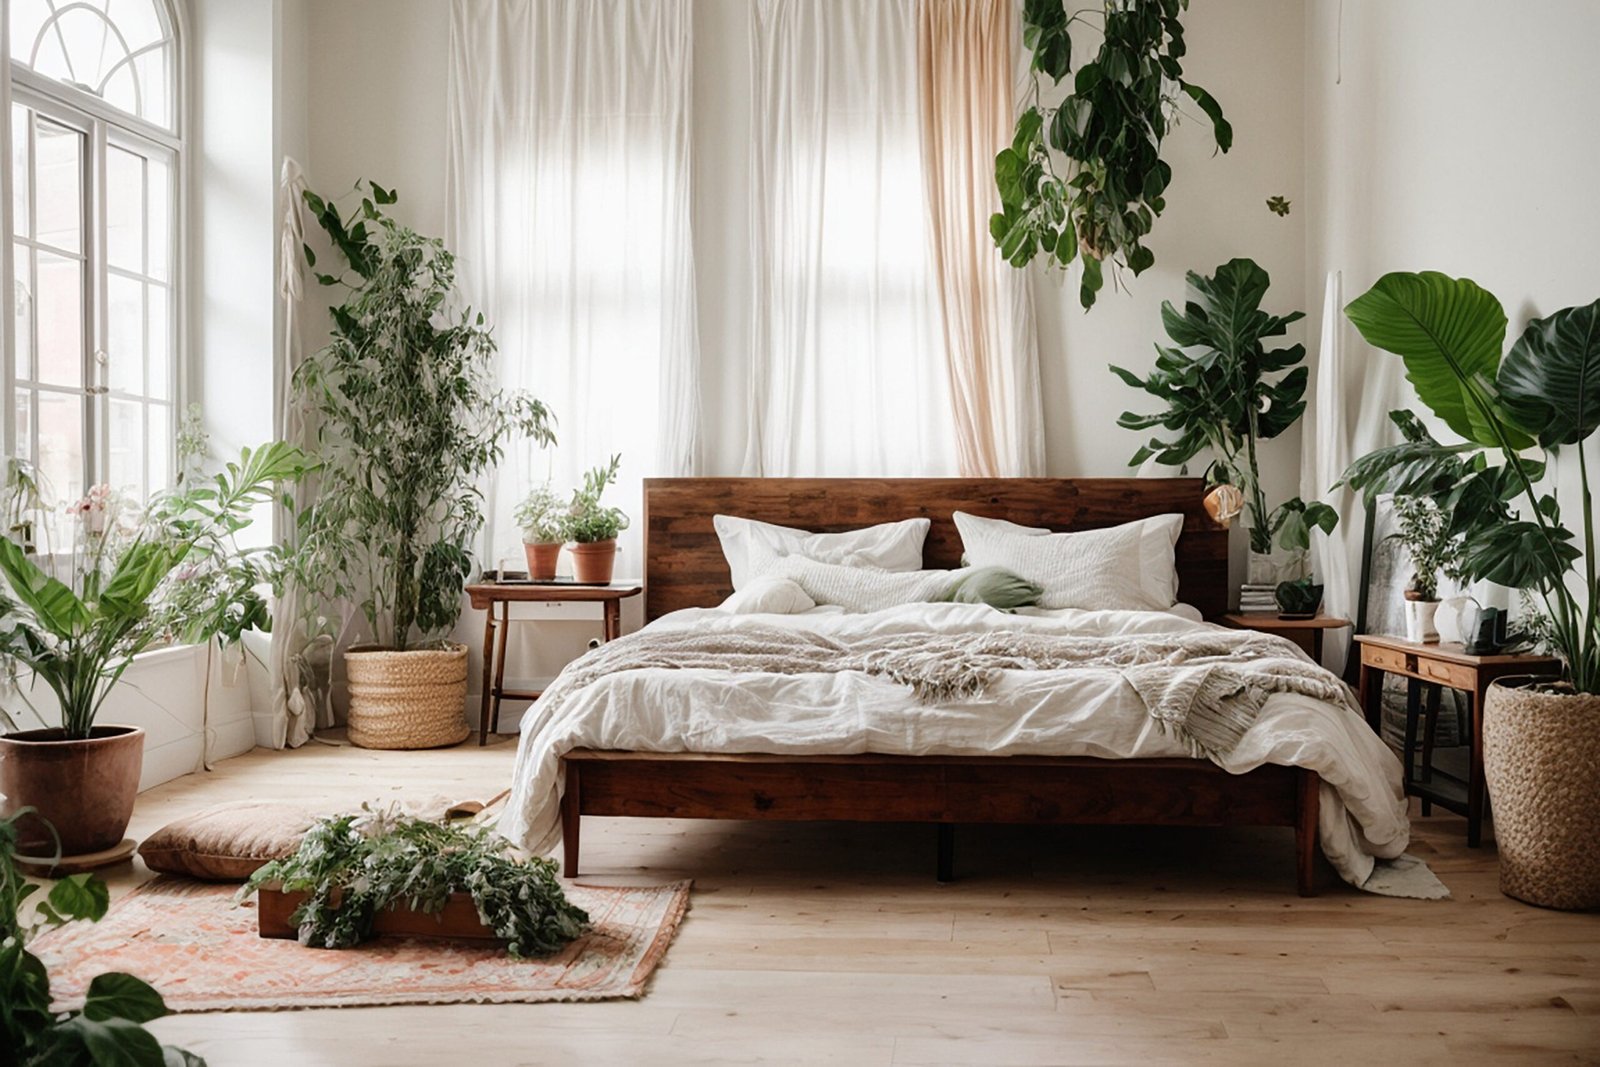 Bedroom with a large wooden bed and lots of green plants.